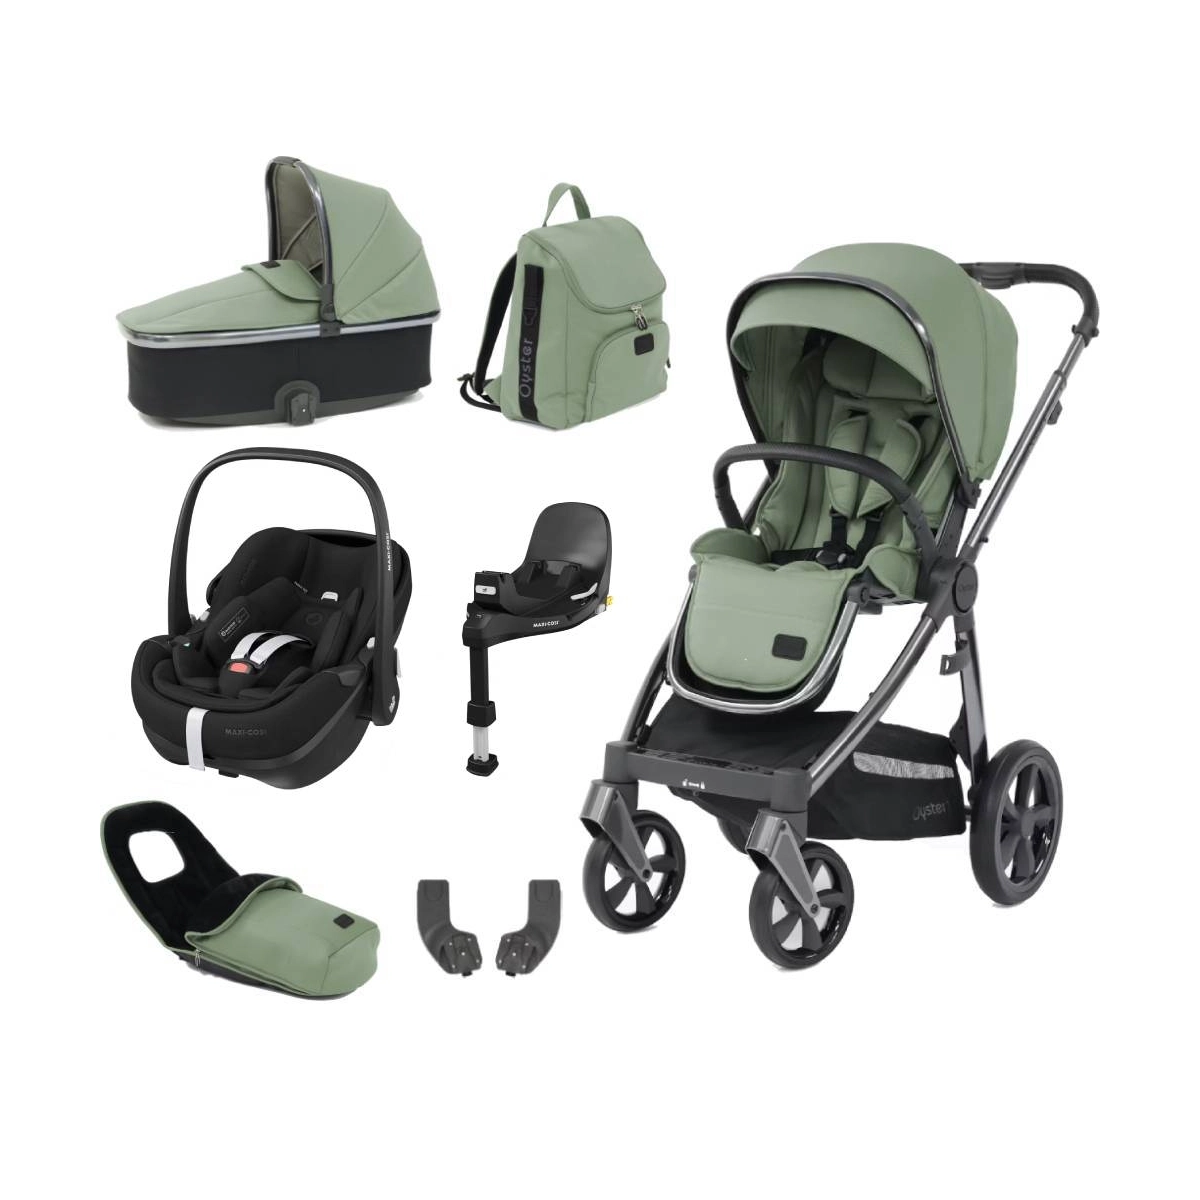 BabyStyle Oyster 3 Gun Metal Chassis Luxury 7 Piece Bundle with Maxi Cosi Pebble 360 Car Seat & Base